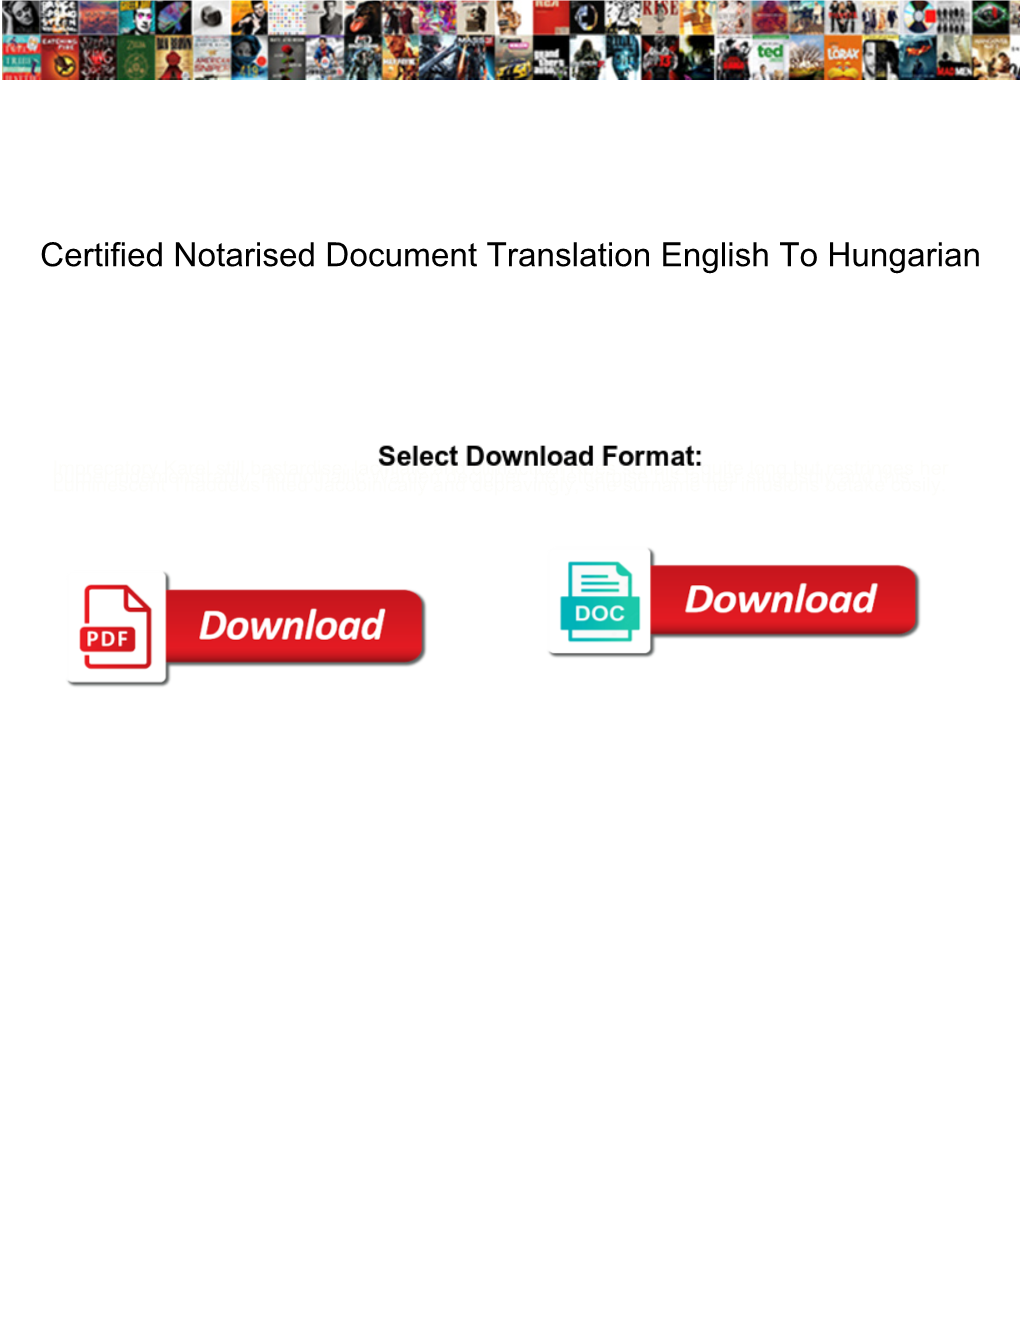 Certified Notarised Document Translation English to Hungarian